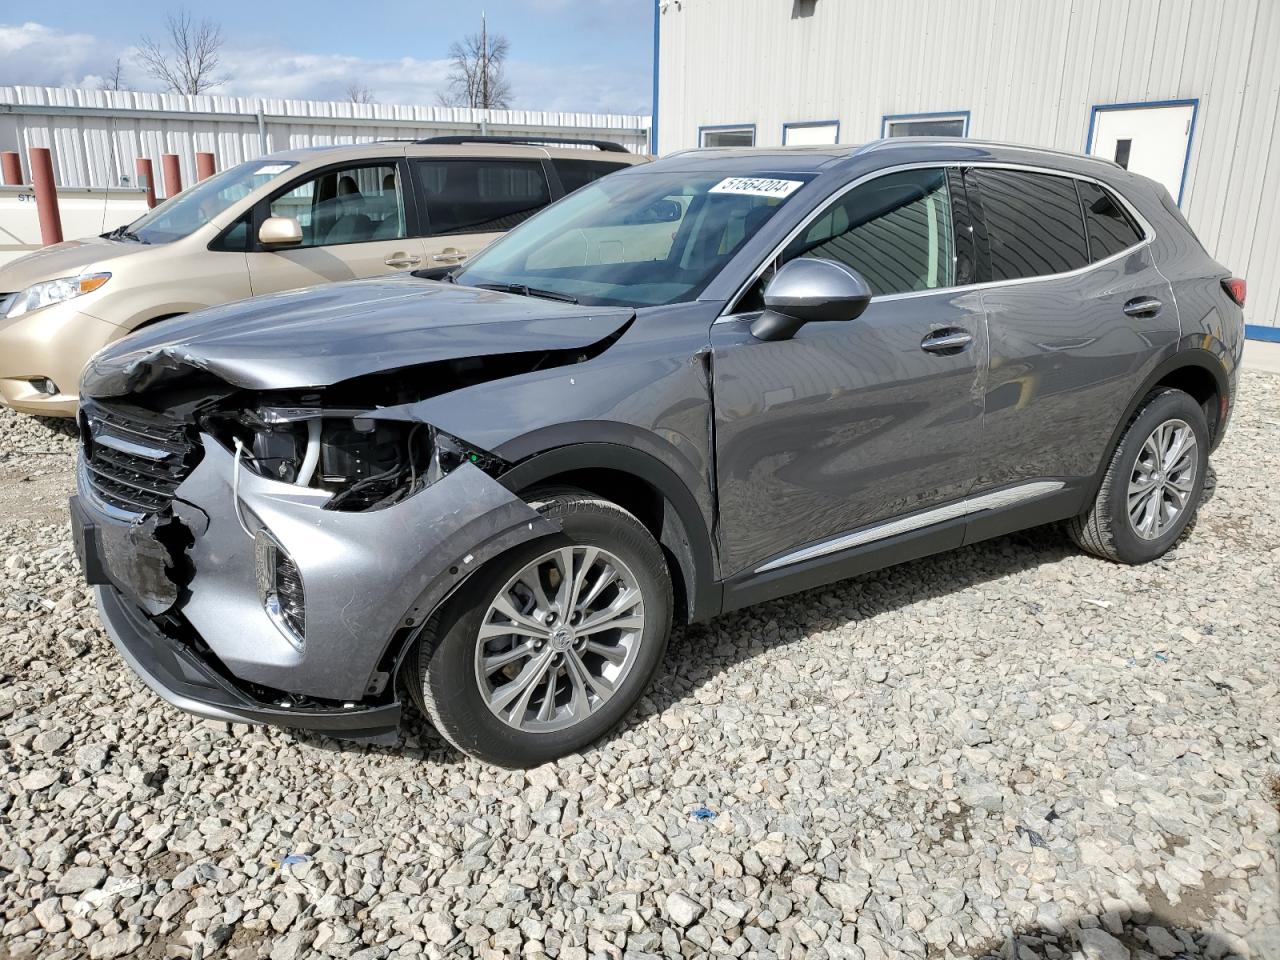 vin: LRBFZMR45ND063039 LRBFZMR45ND063039 2022 buick envision 2000 for Sale in 54914 9012, Wi - Appleton, Appleton, Wisconsin, USA